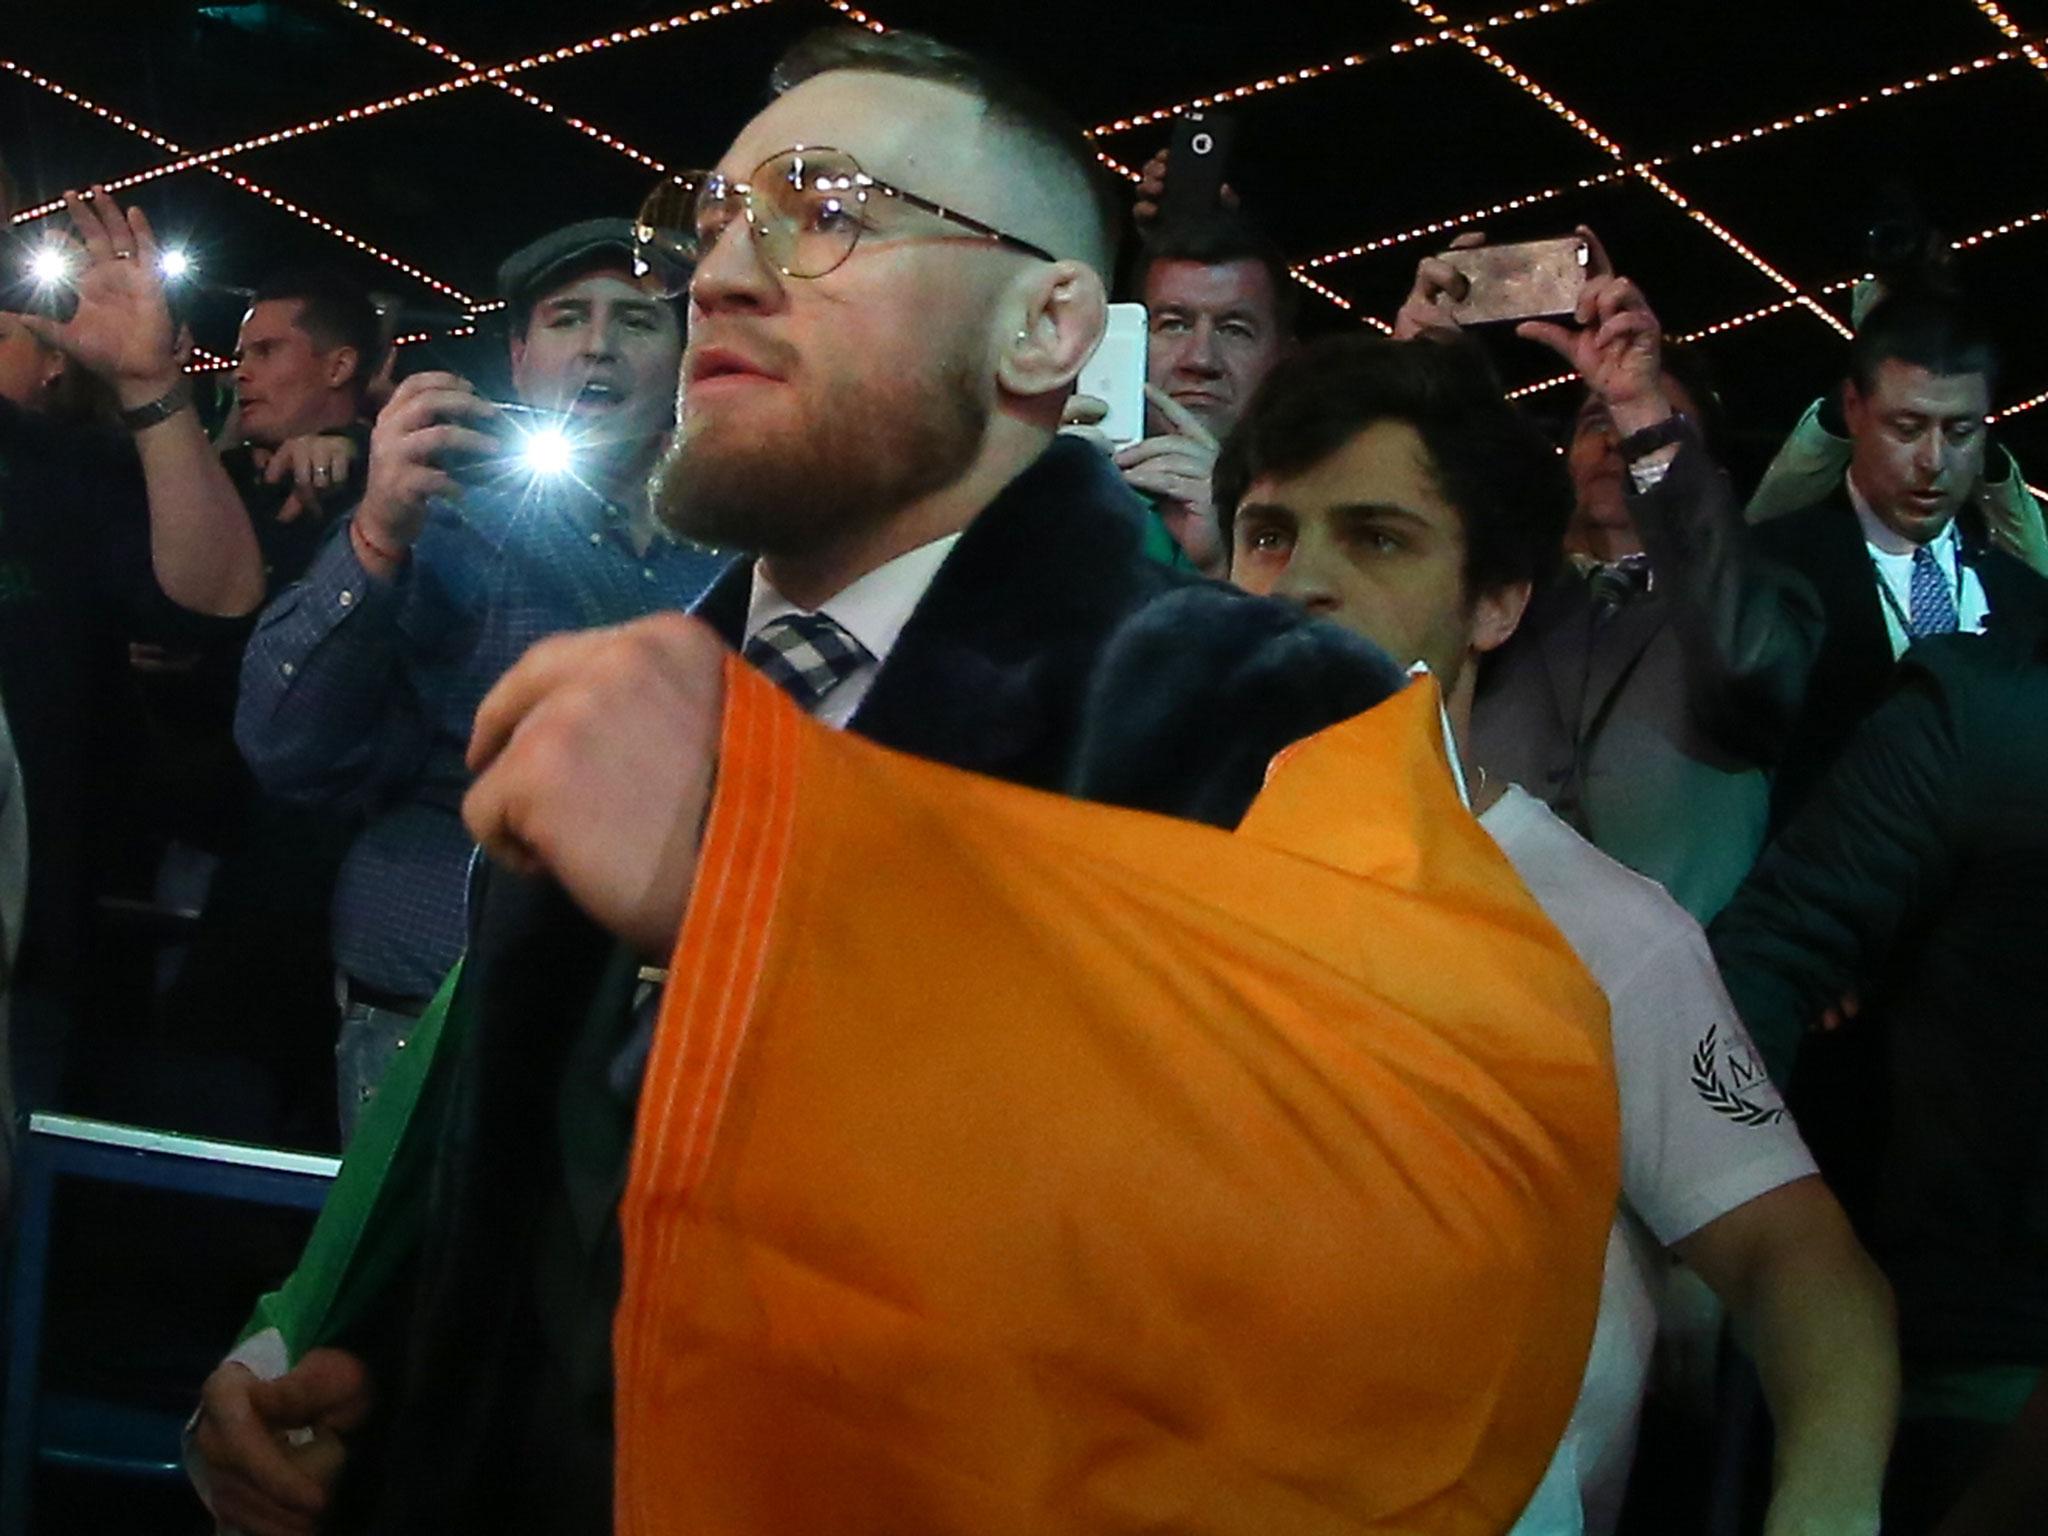 Conor McGregor has continued his war of words with Floyd Mayweather